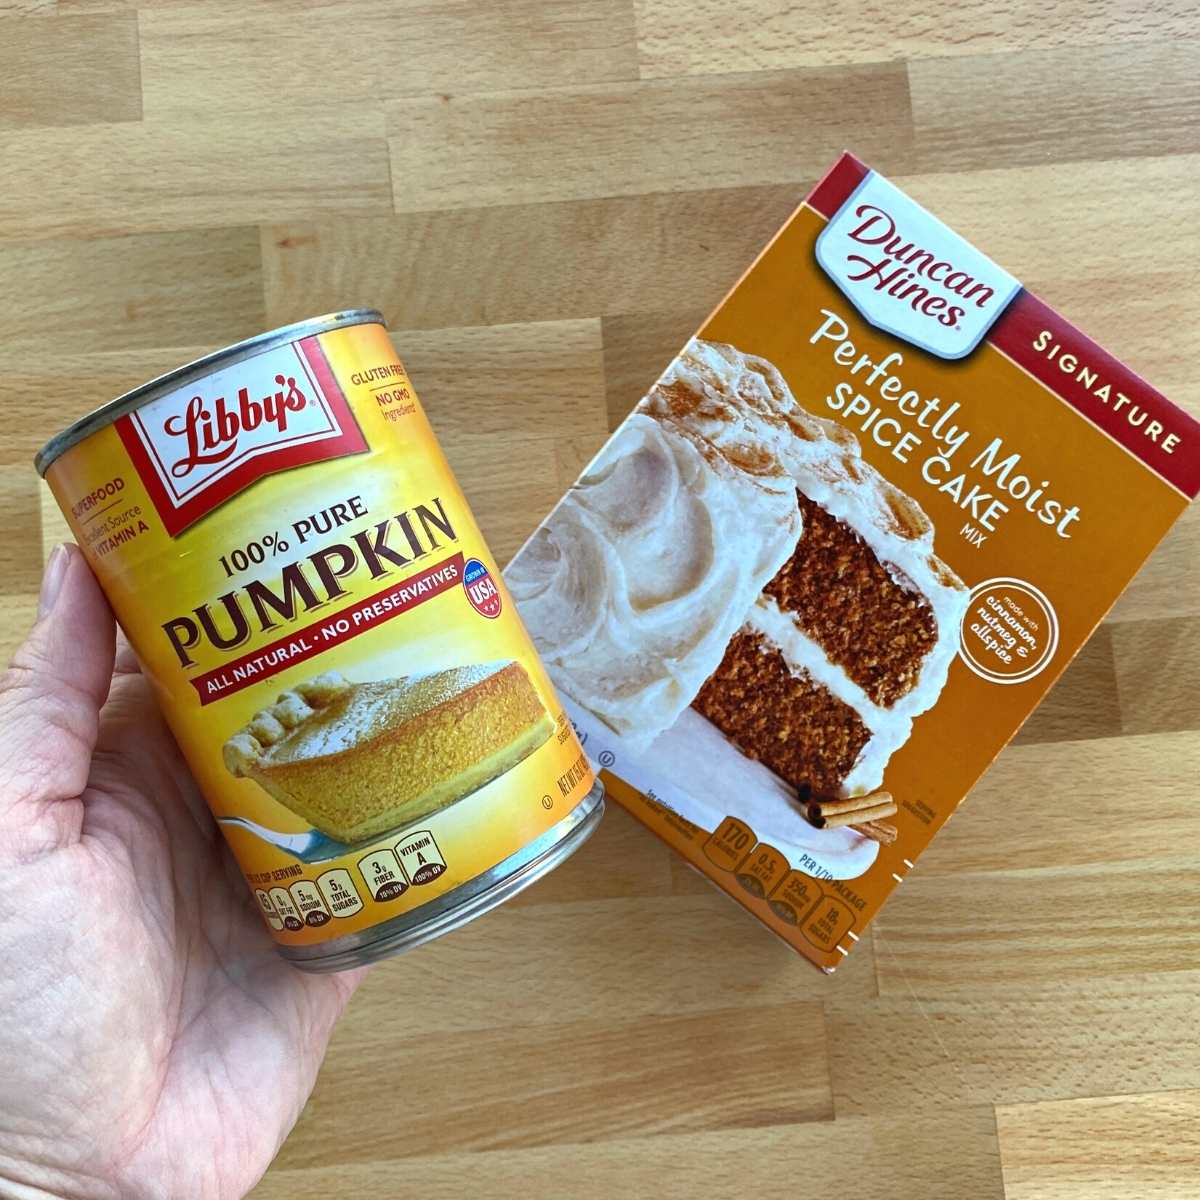 Hand holding a can of pumpkin puree and a box of Duncan Hines Spice Cake mix.